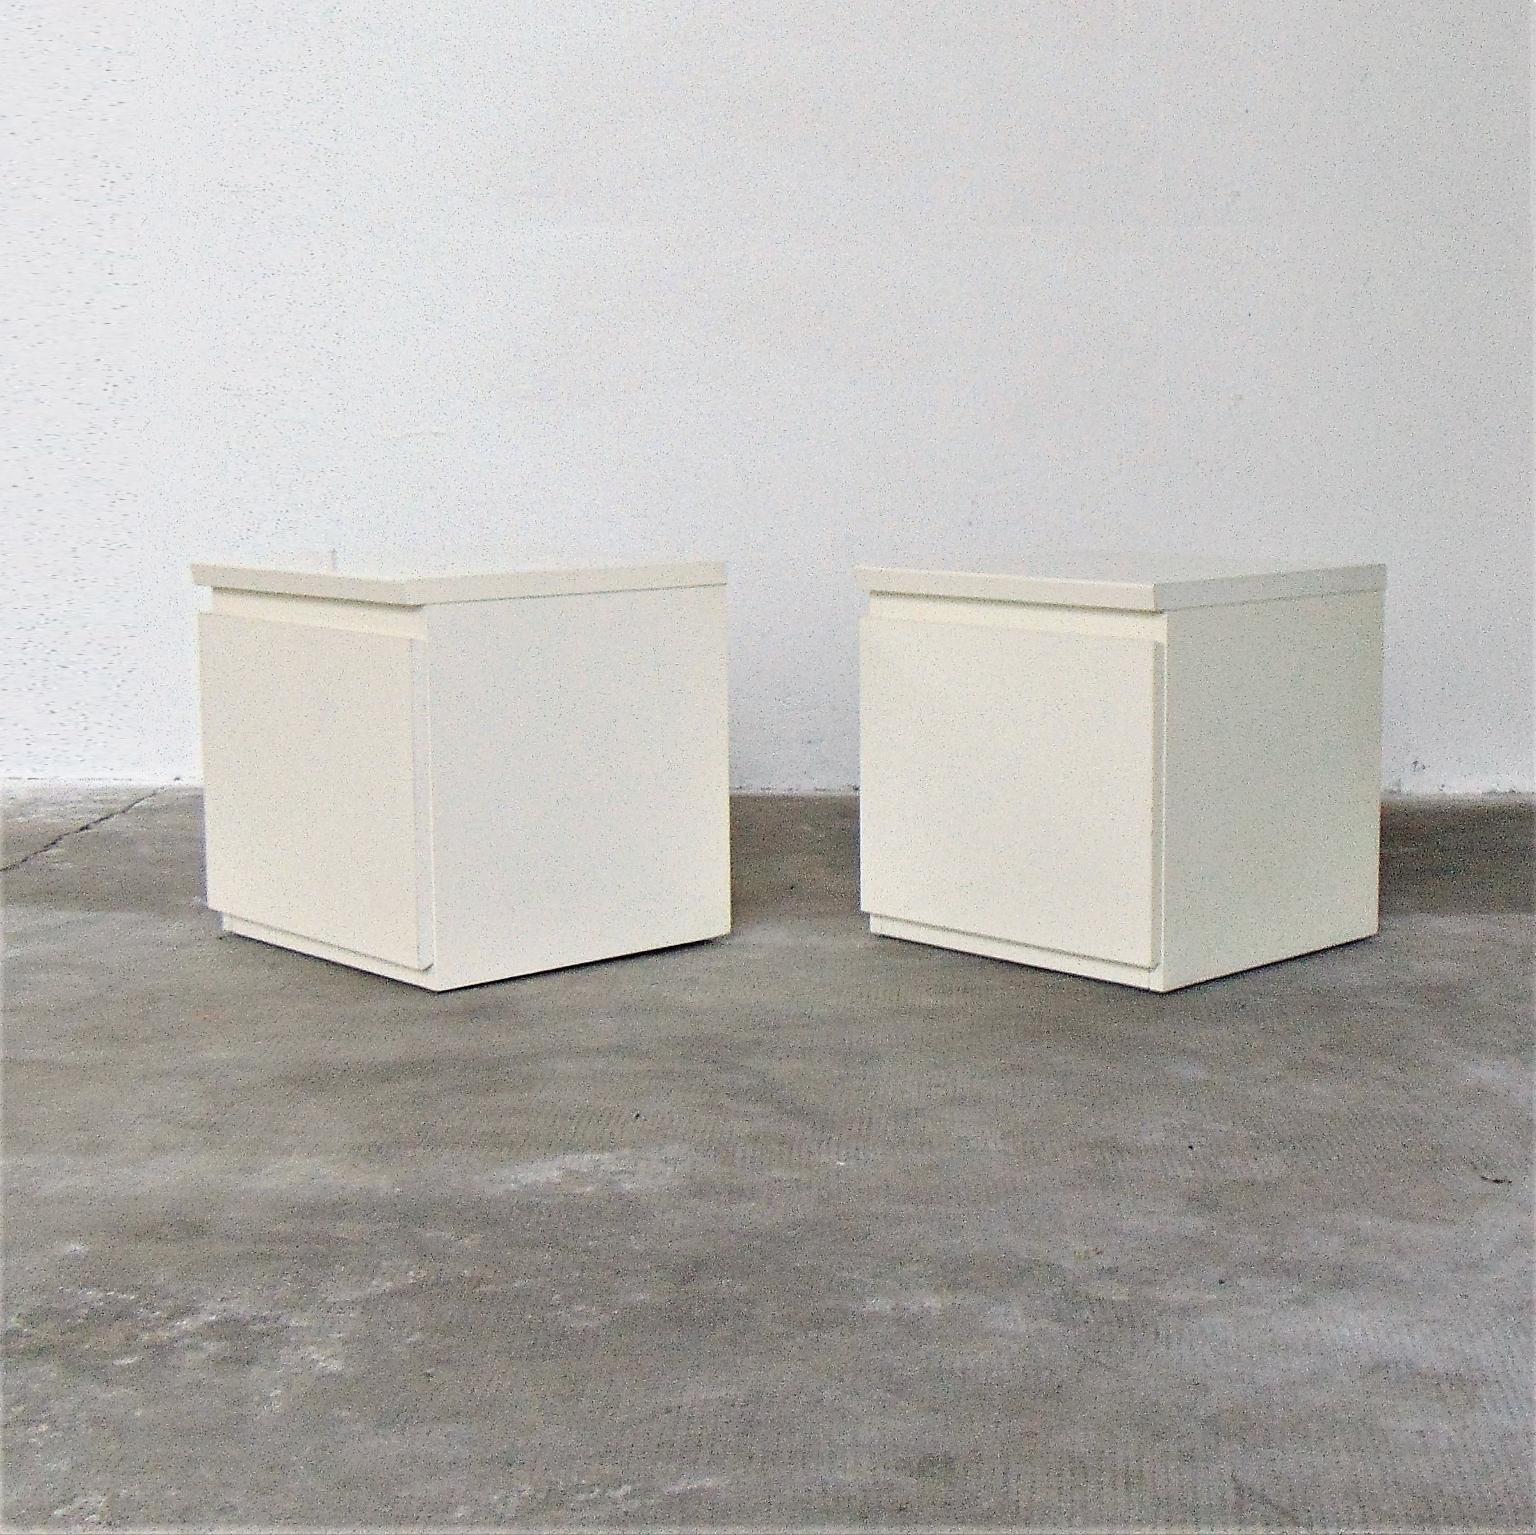 1979 Claudio Salocchi Two Low Cabinets in White Lacquer by Sormani, Italy For Sale 3